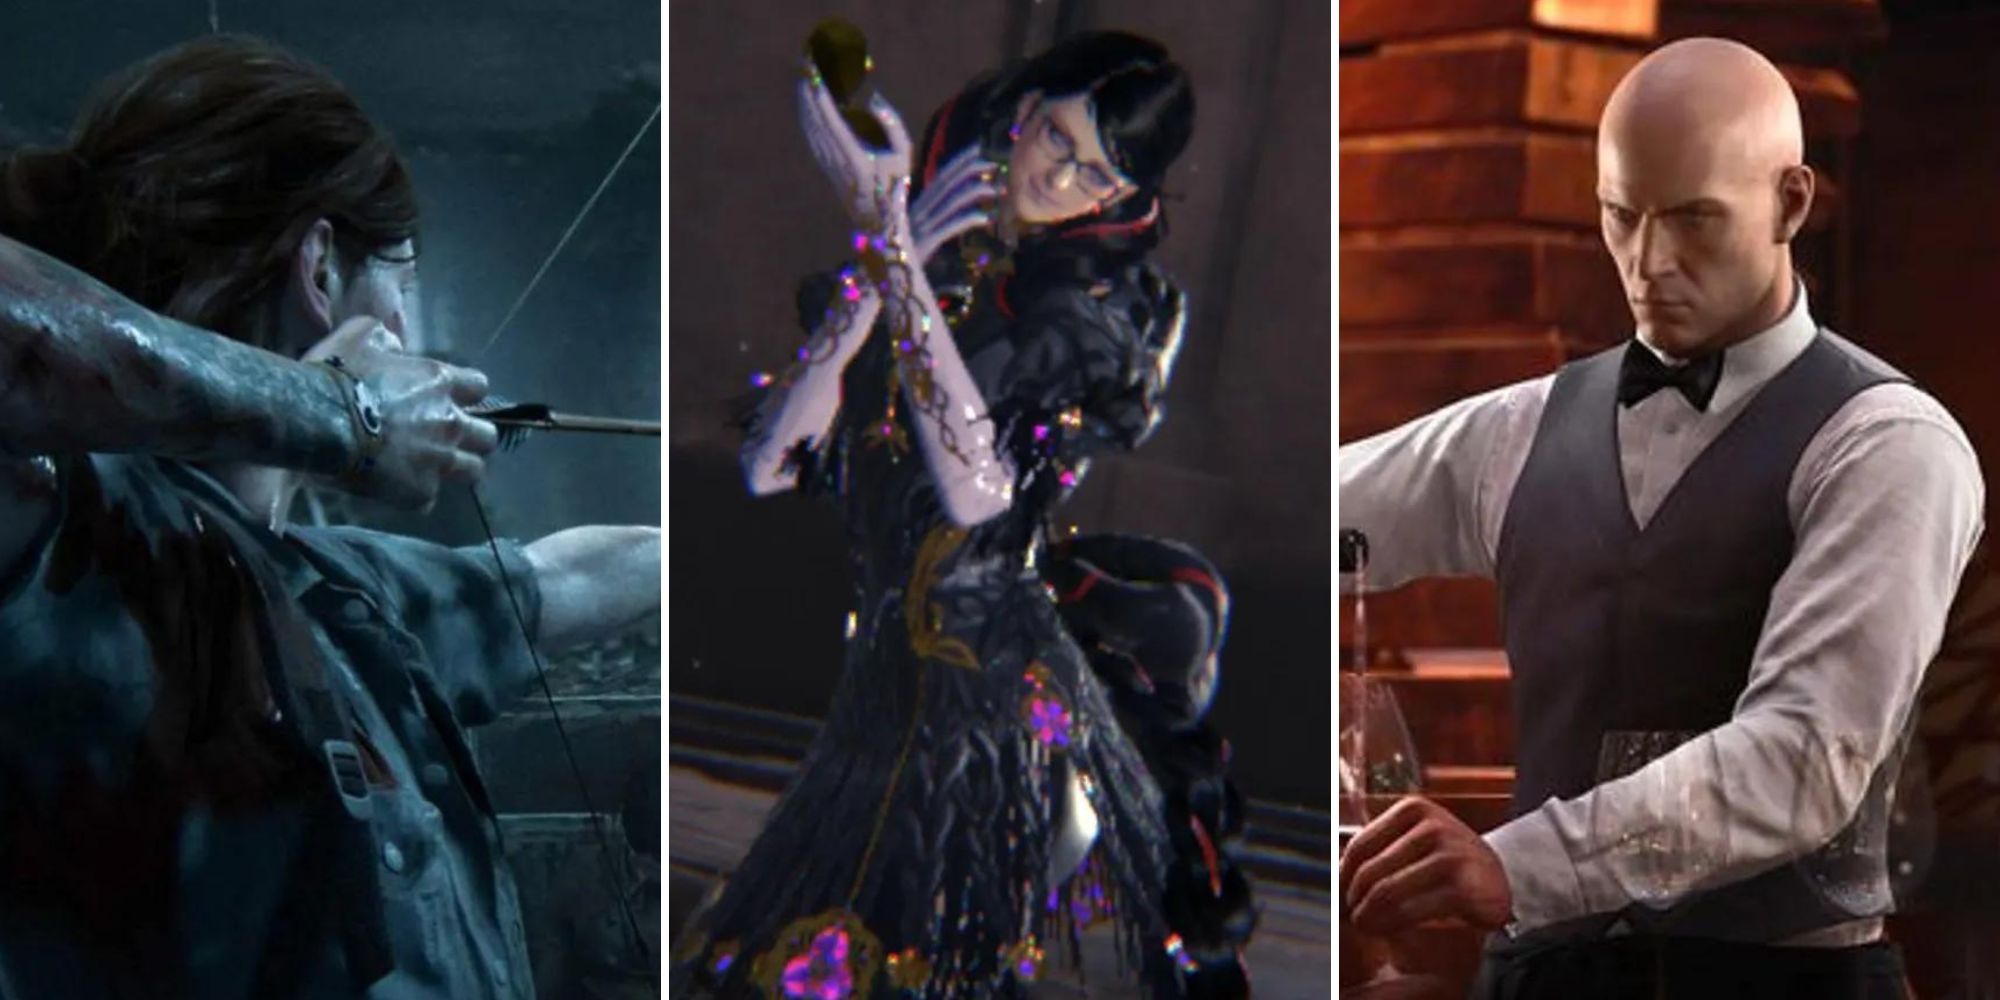 Three photos. From left to right - Ellie Williams using a bow in The Last of Us 2. Bayonetta 3 idle animation. She is wearing a black dress. The final photo is Agent 47 disguising as a bartender and pouring a glass.